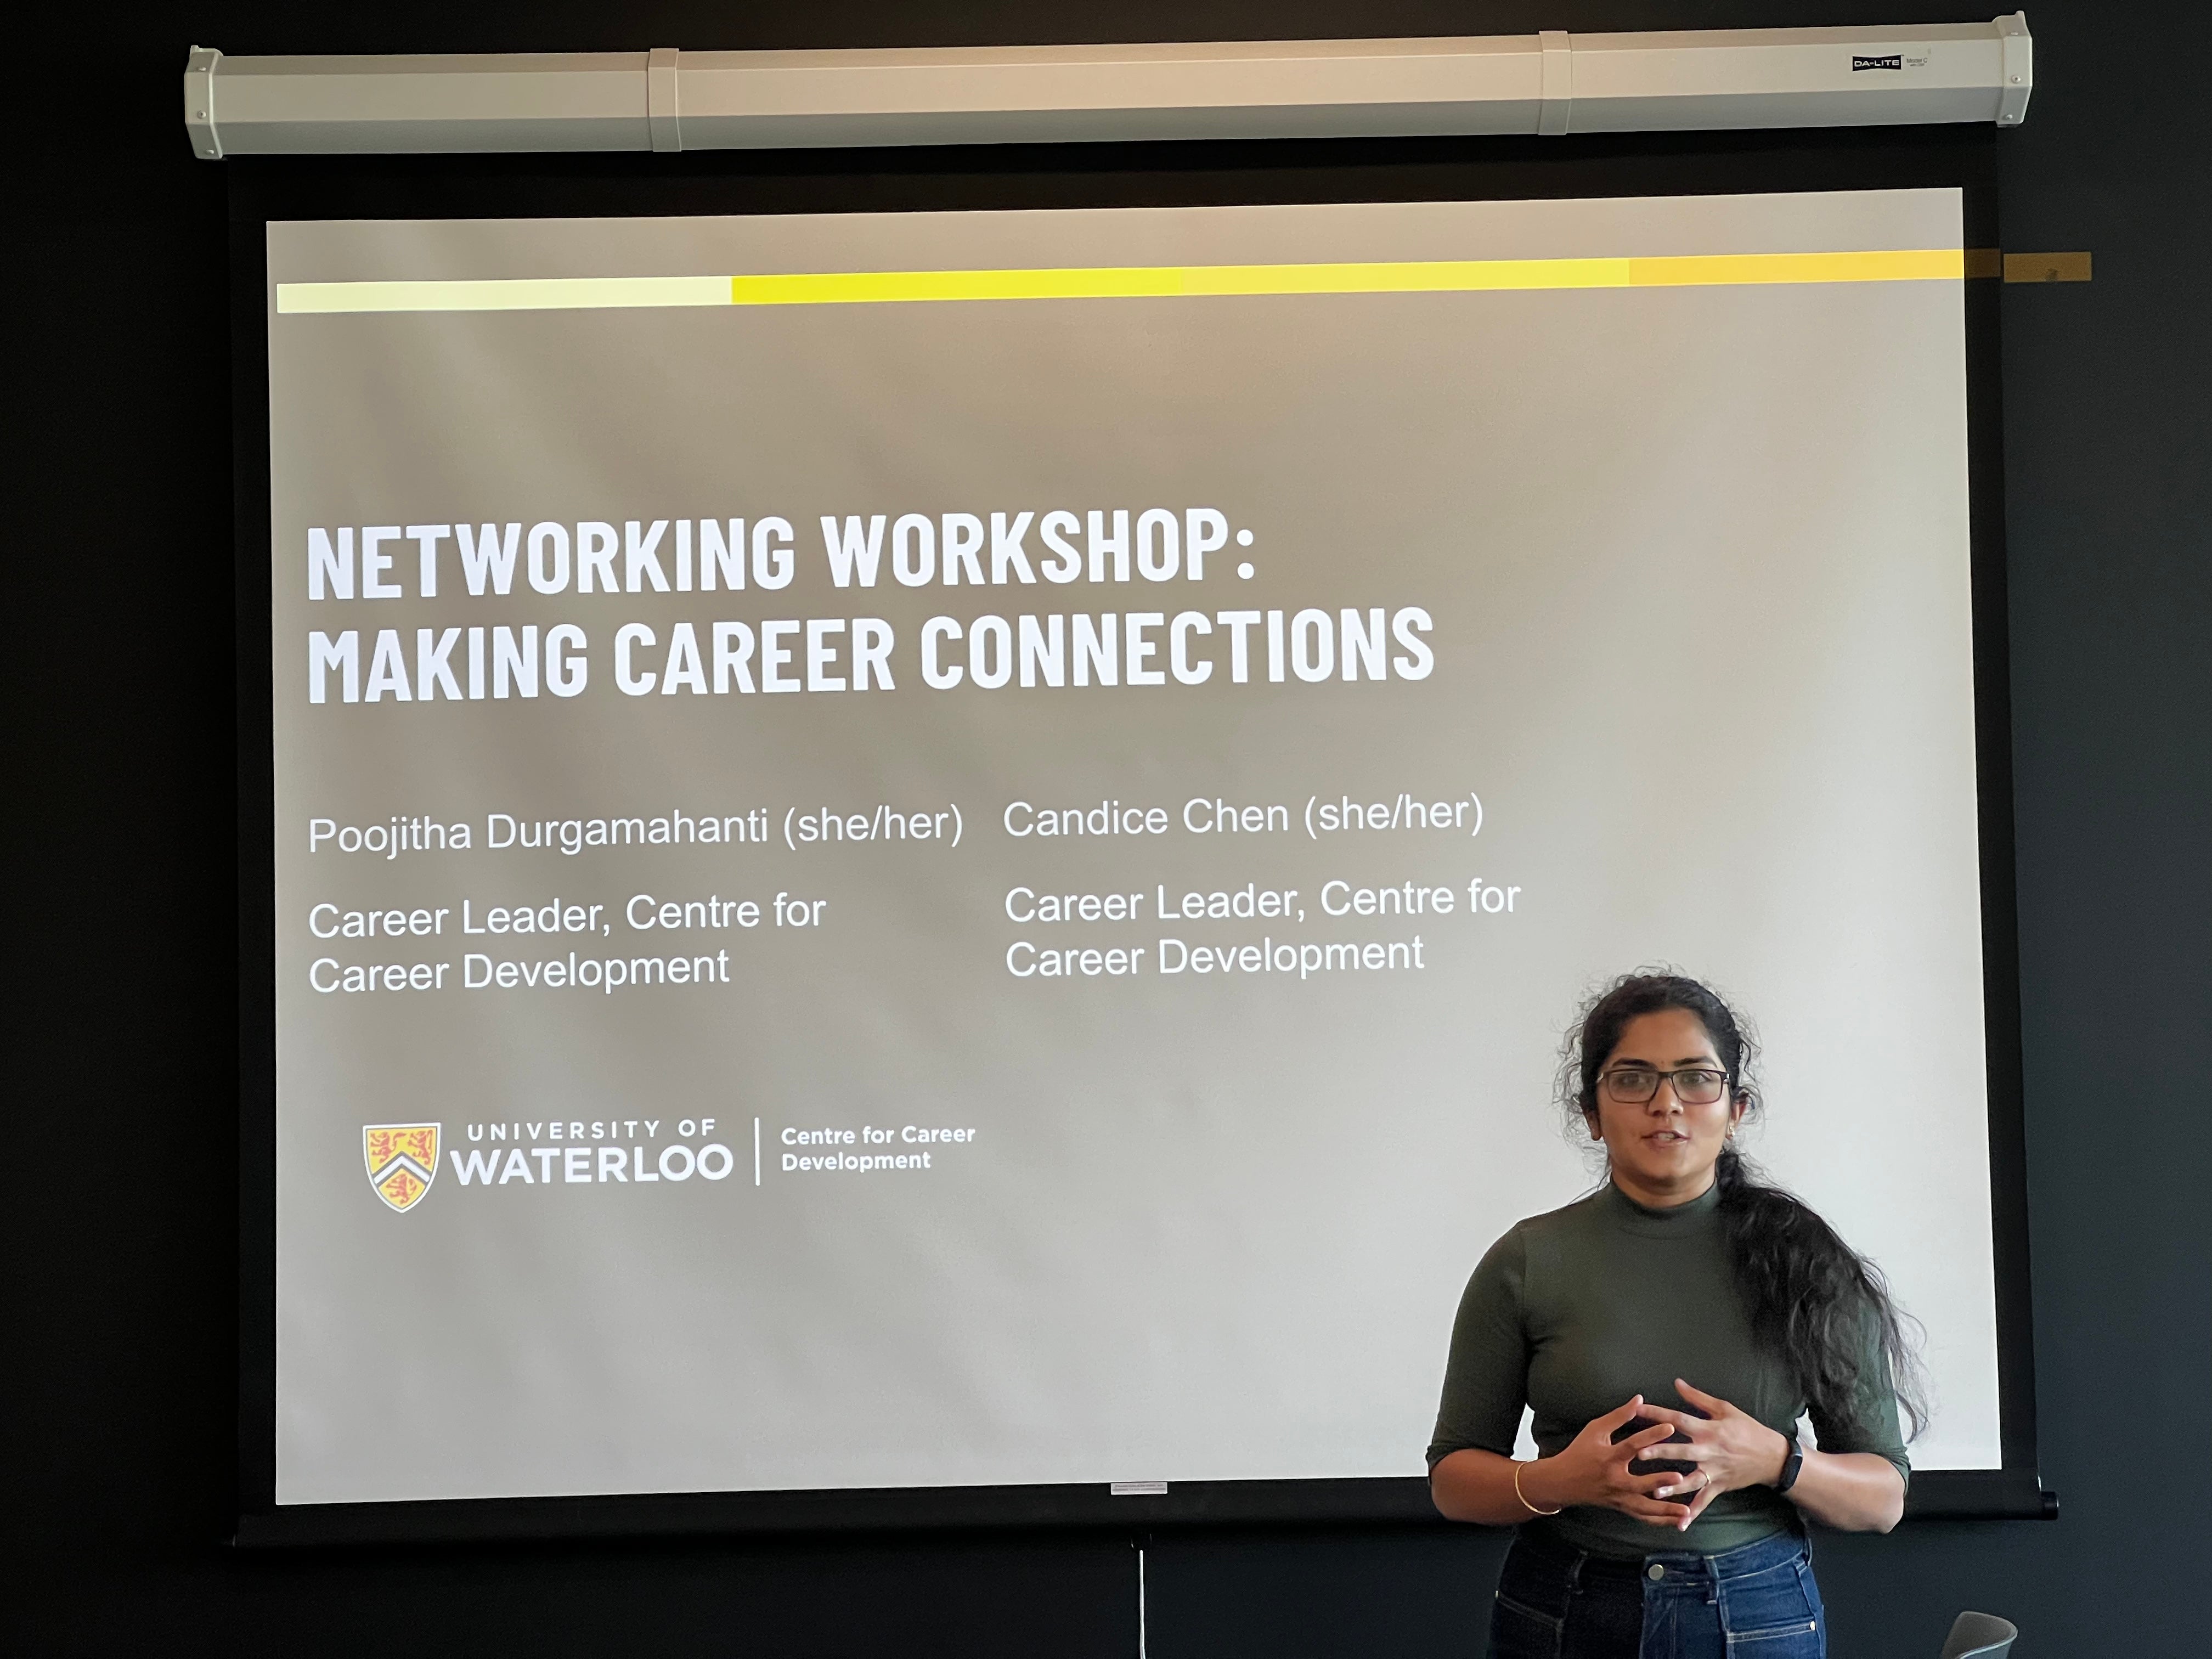 Networking workshop: making career connections being presented by a girl (Kirti)